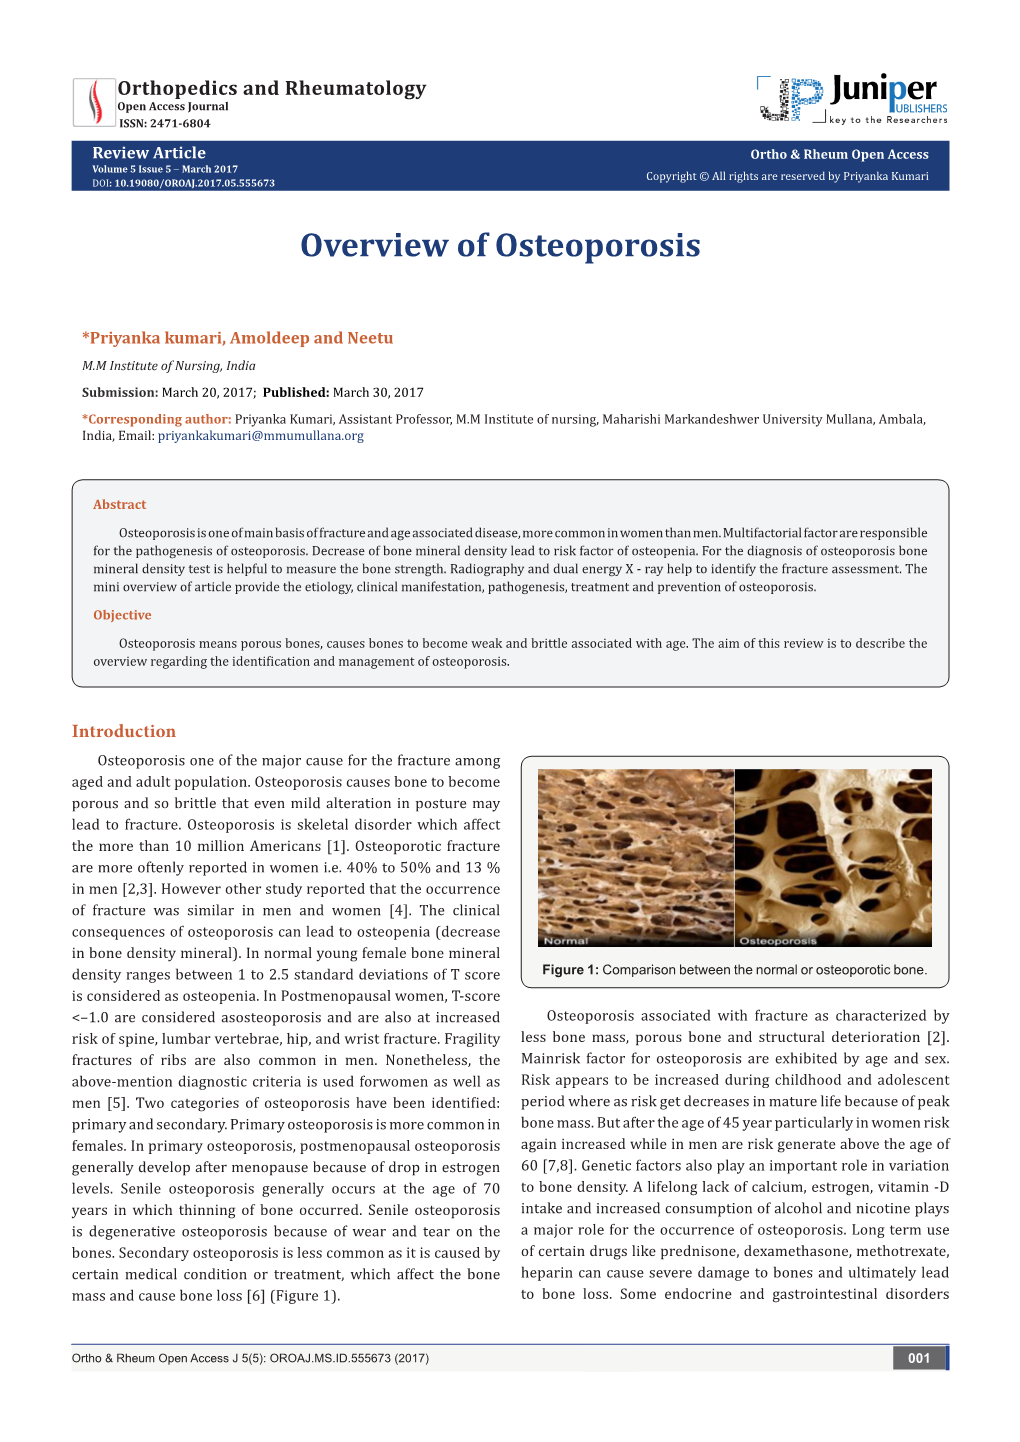 Overview of Osteoporosis